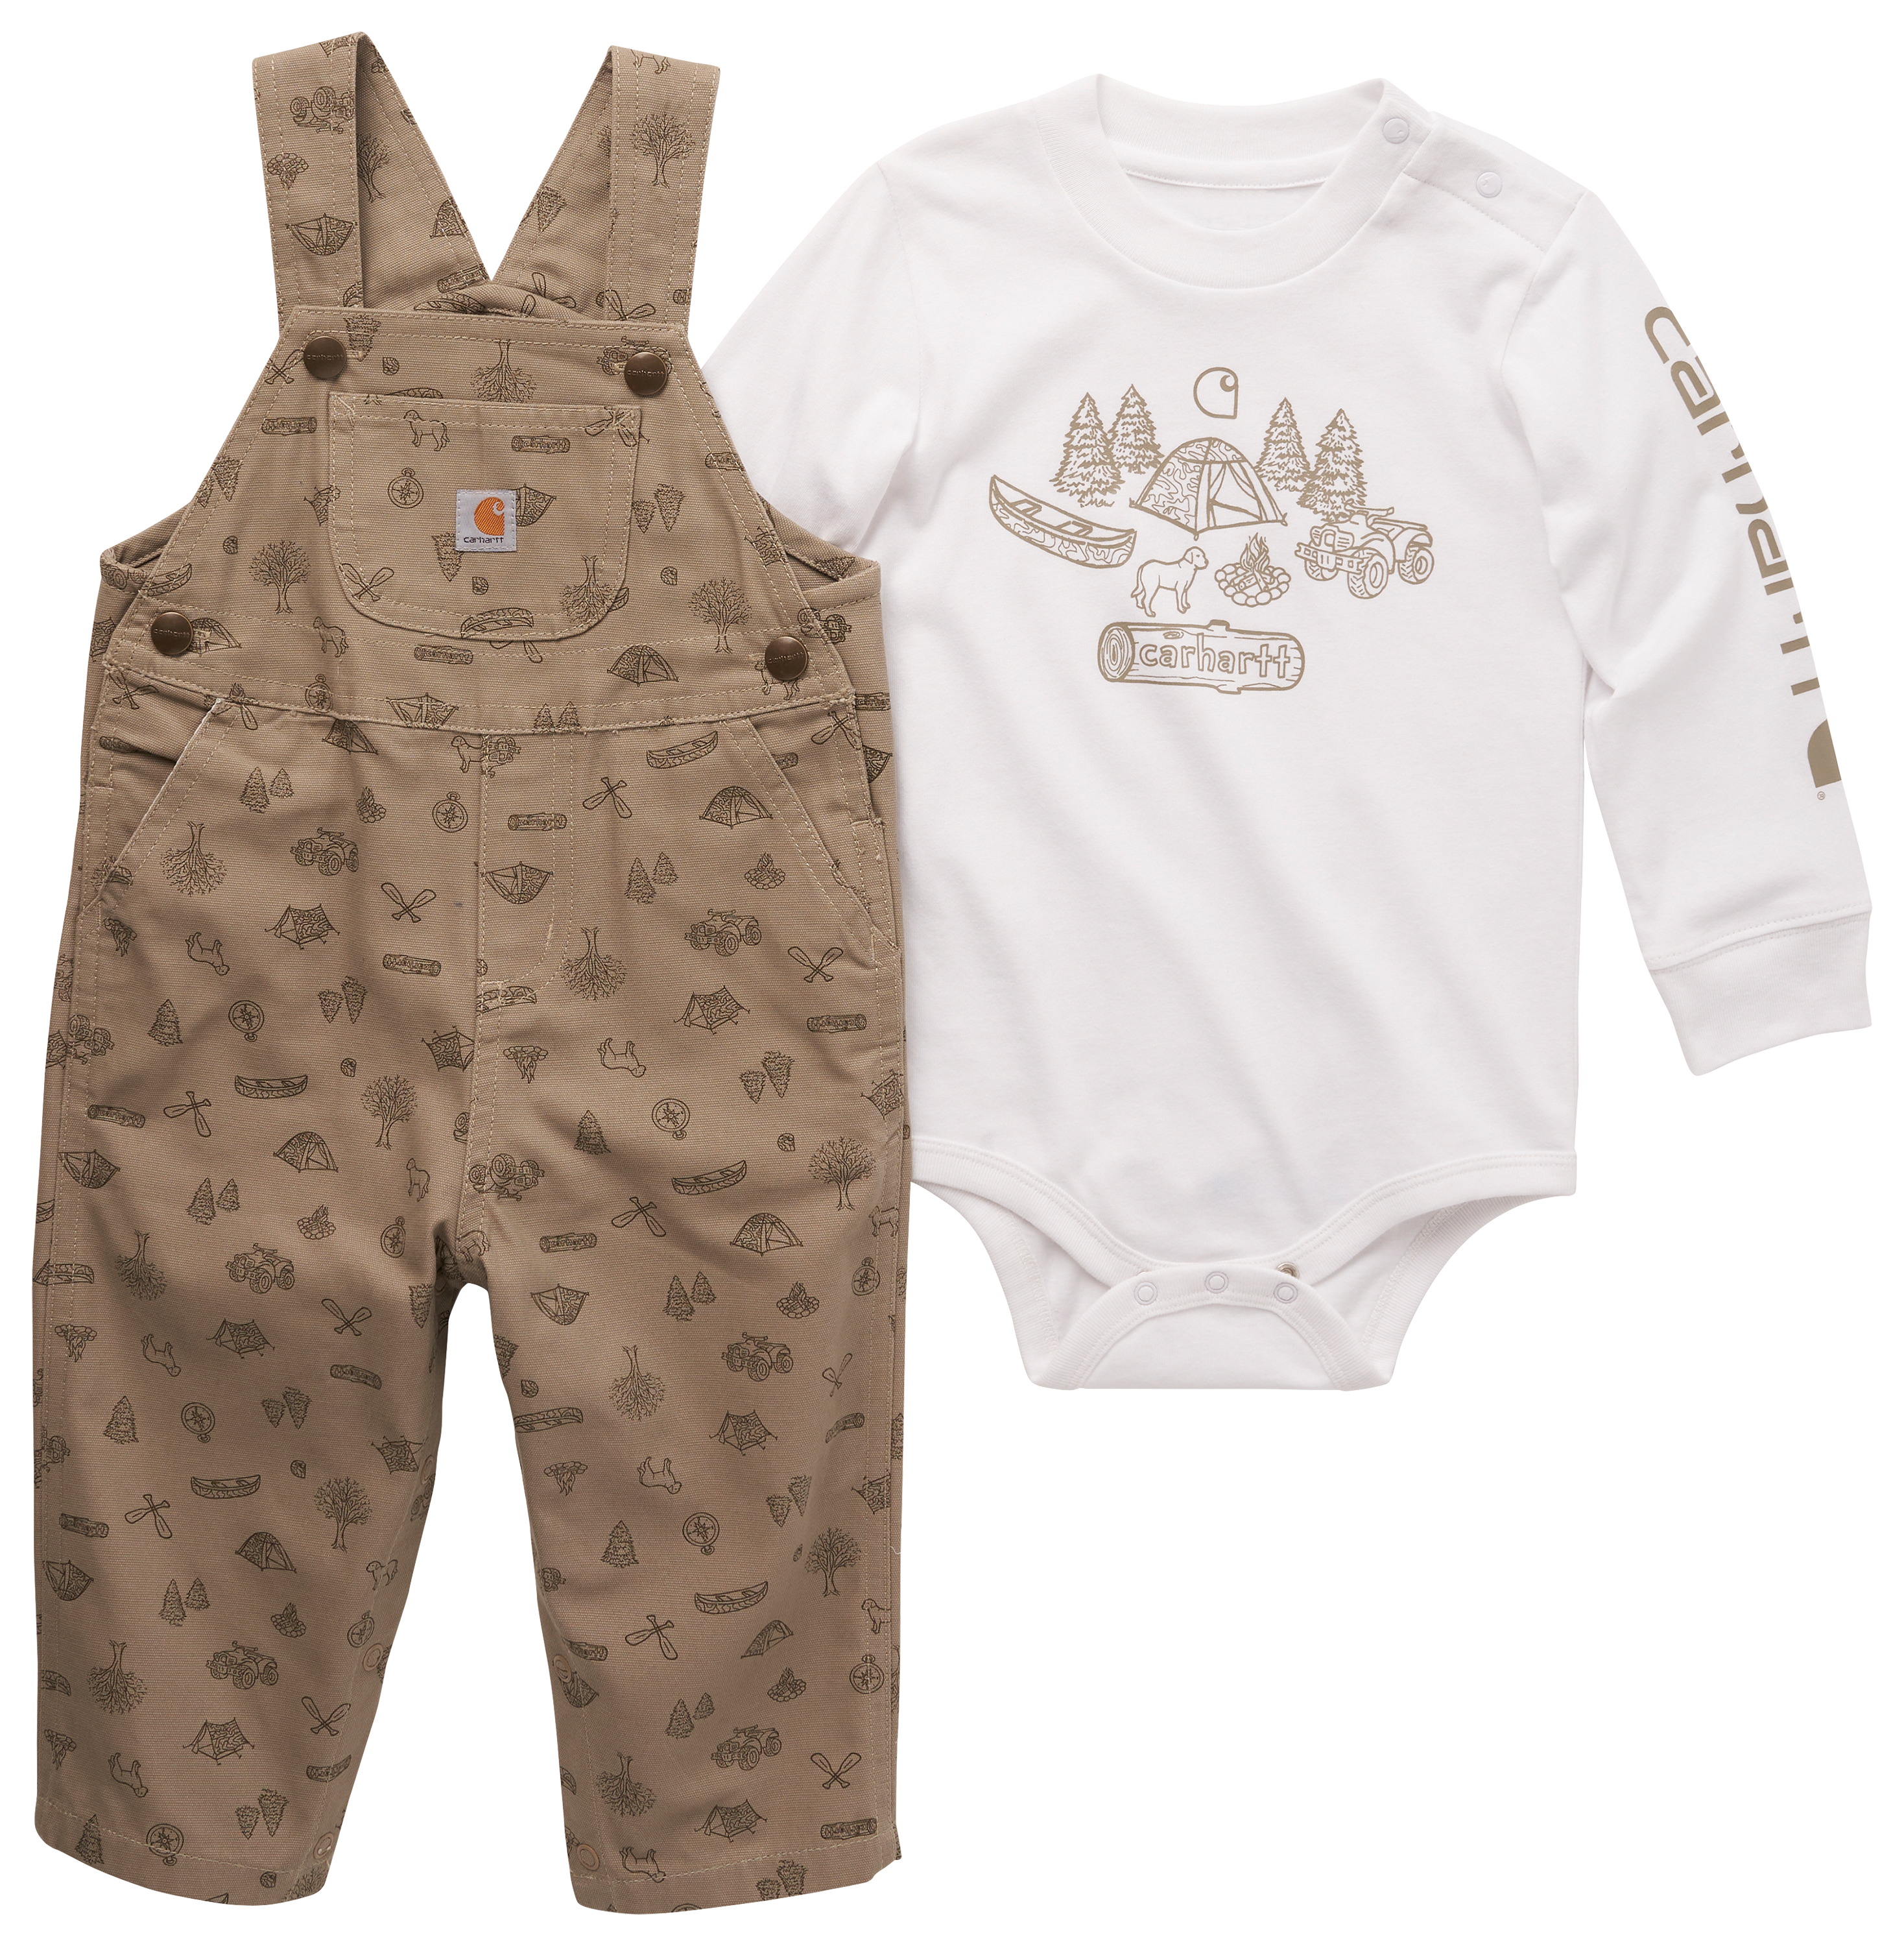 Carhartt Camp Graphic Long Sleeve Bodysuit and Canvas Printed Overalls Set for Baby Boys Winter Twig/White 24 Months